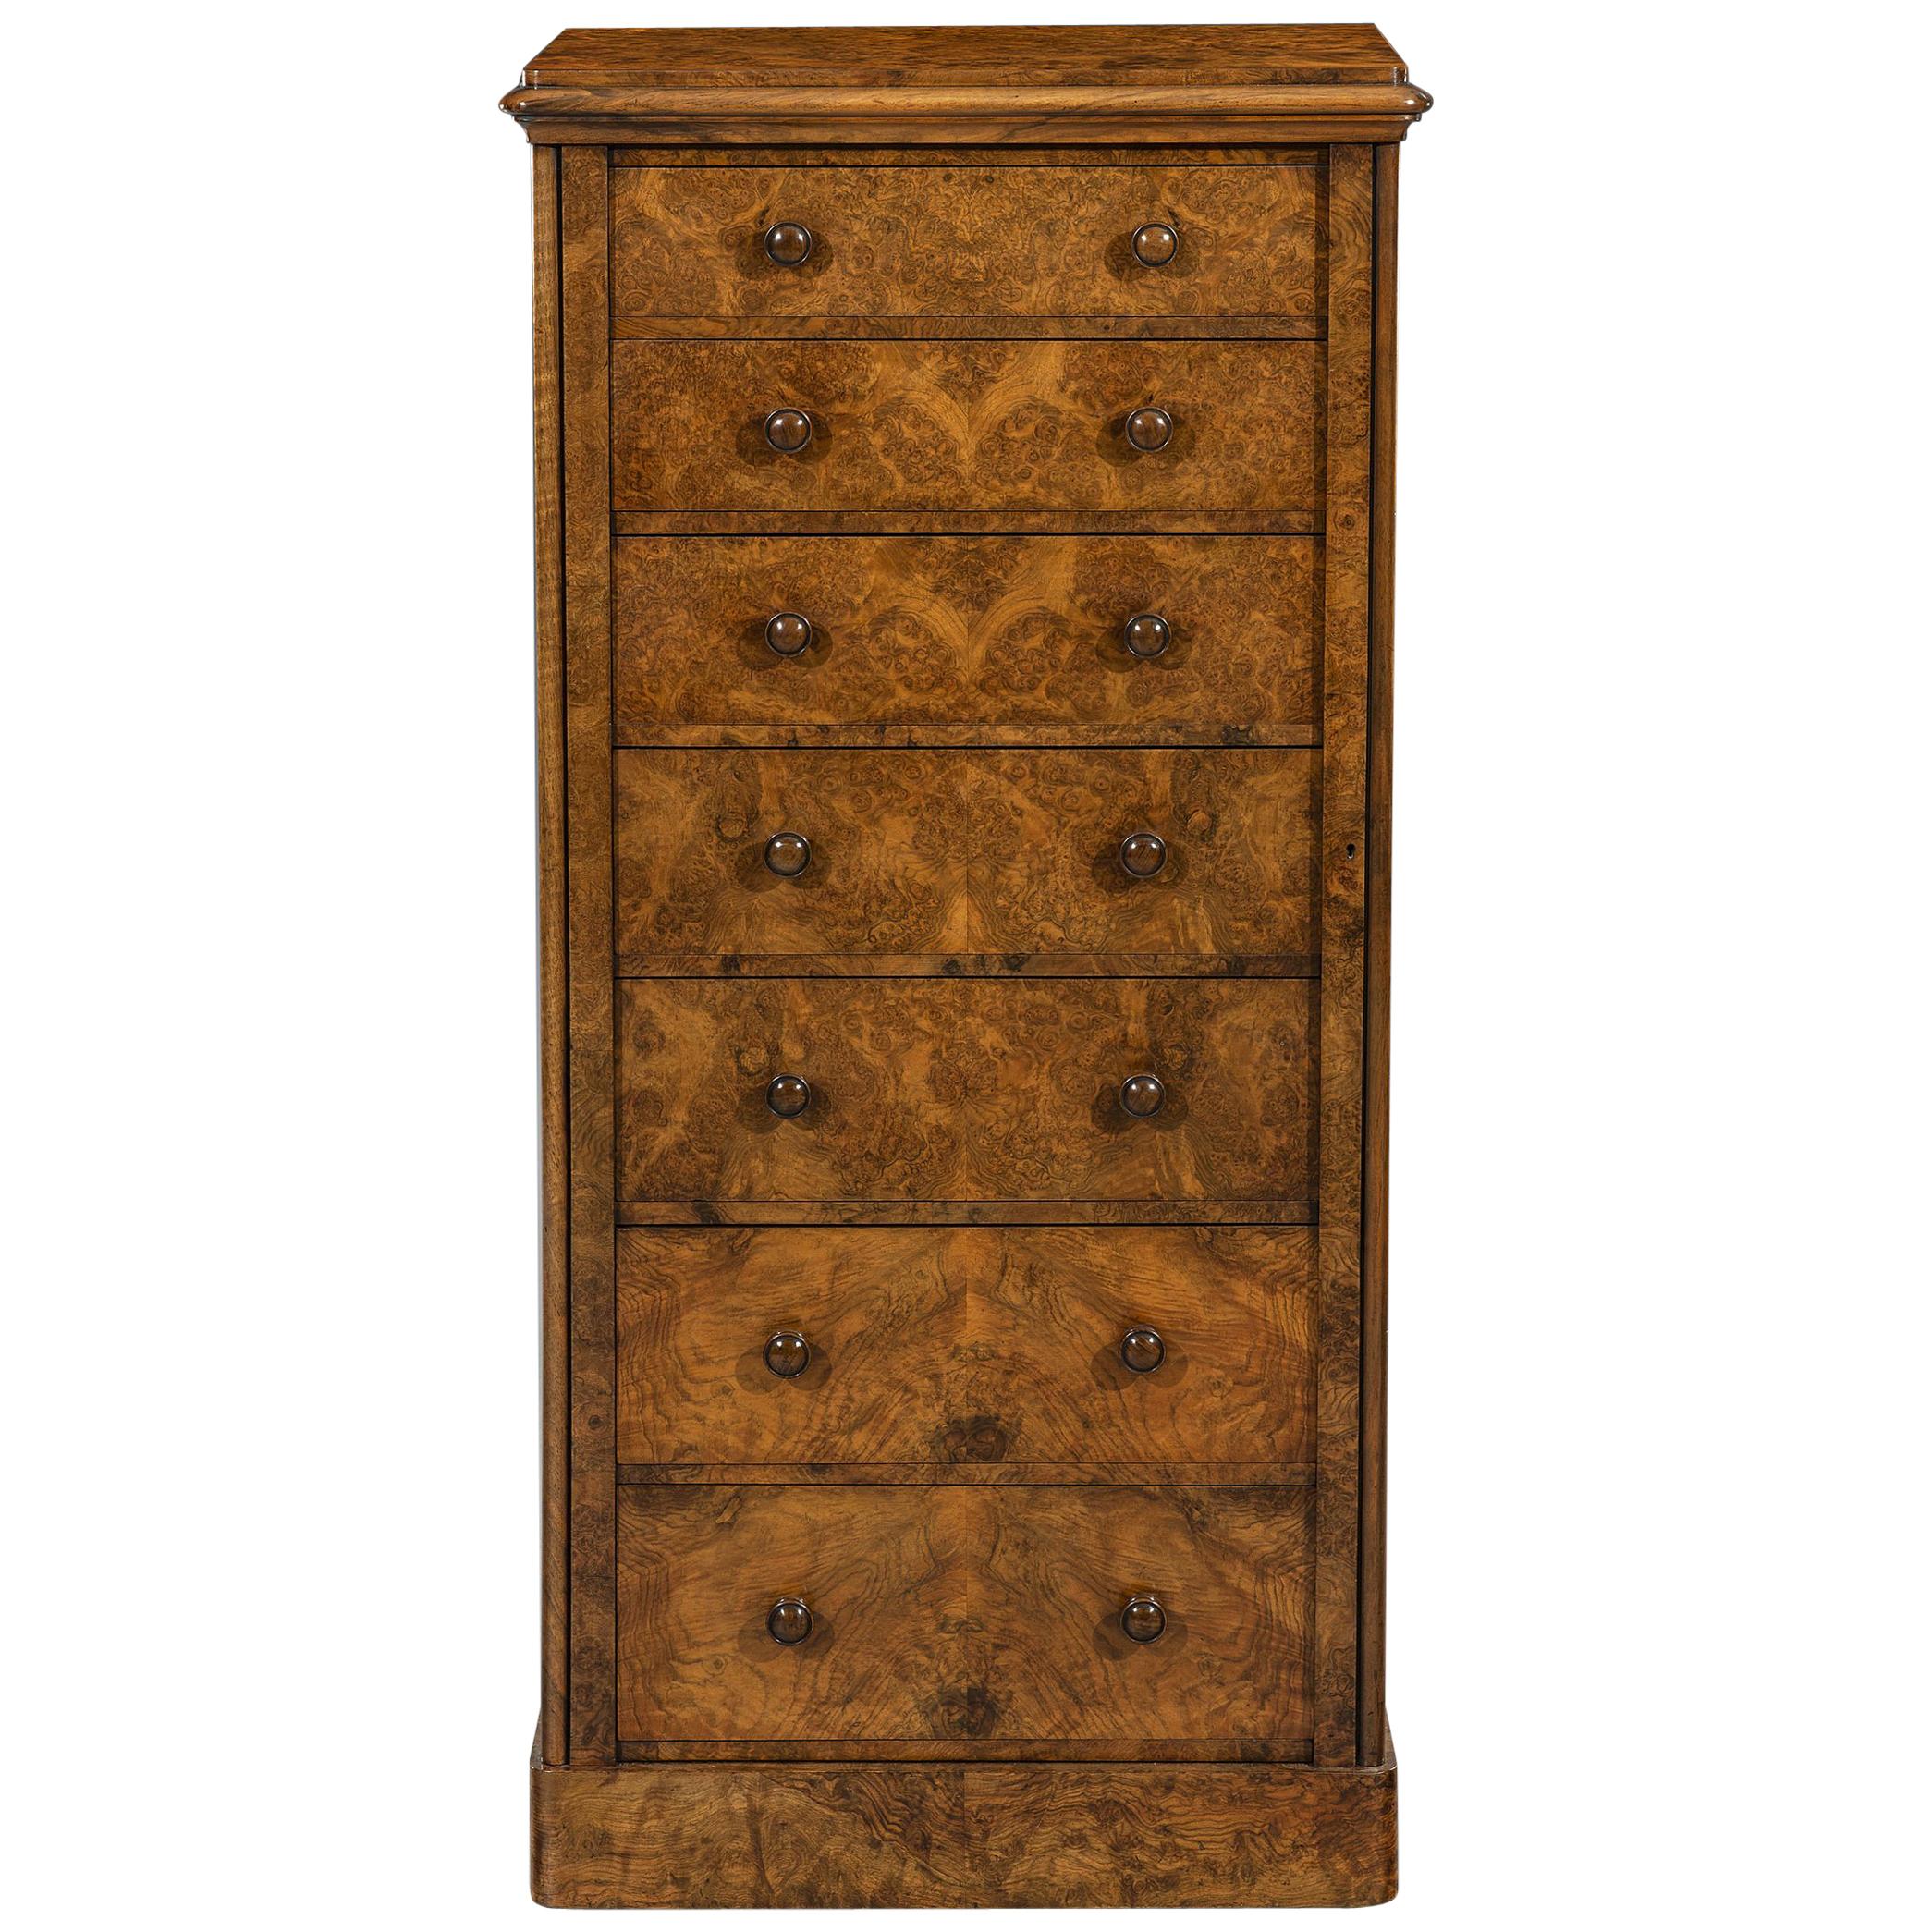 Early Victorian 19th Century English Burr Walnut Wellington Chest of Drawers